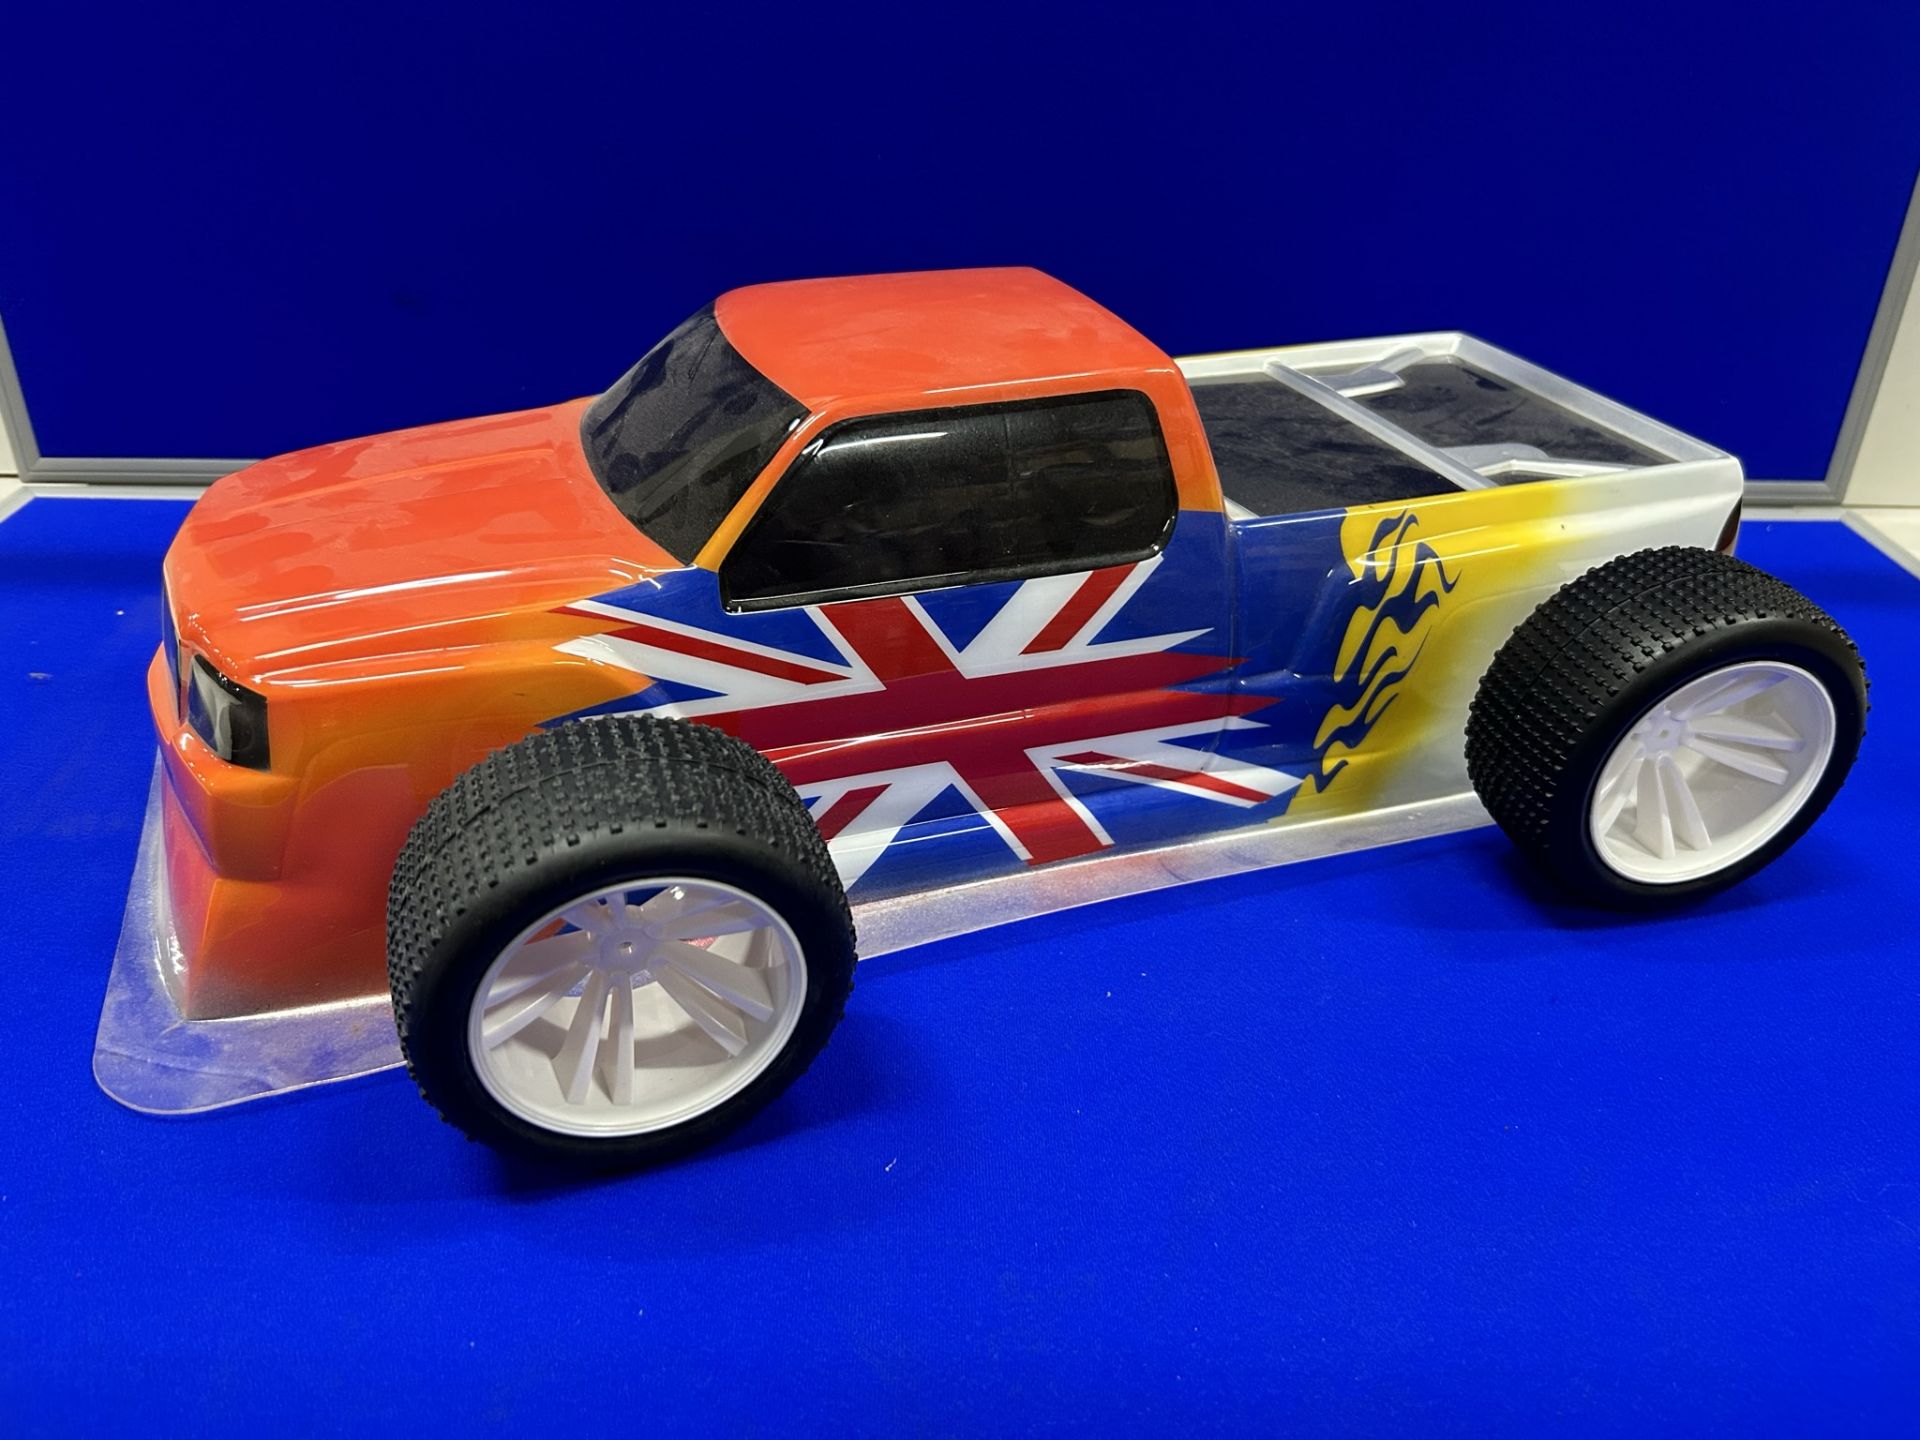 Approximately £74,000 RRP of Scale & RC Controlled Model Cars/Trucks and Accessories